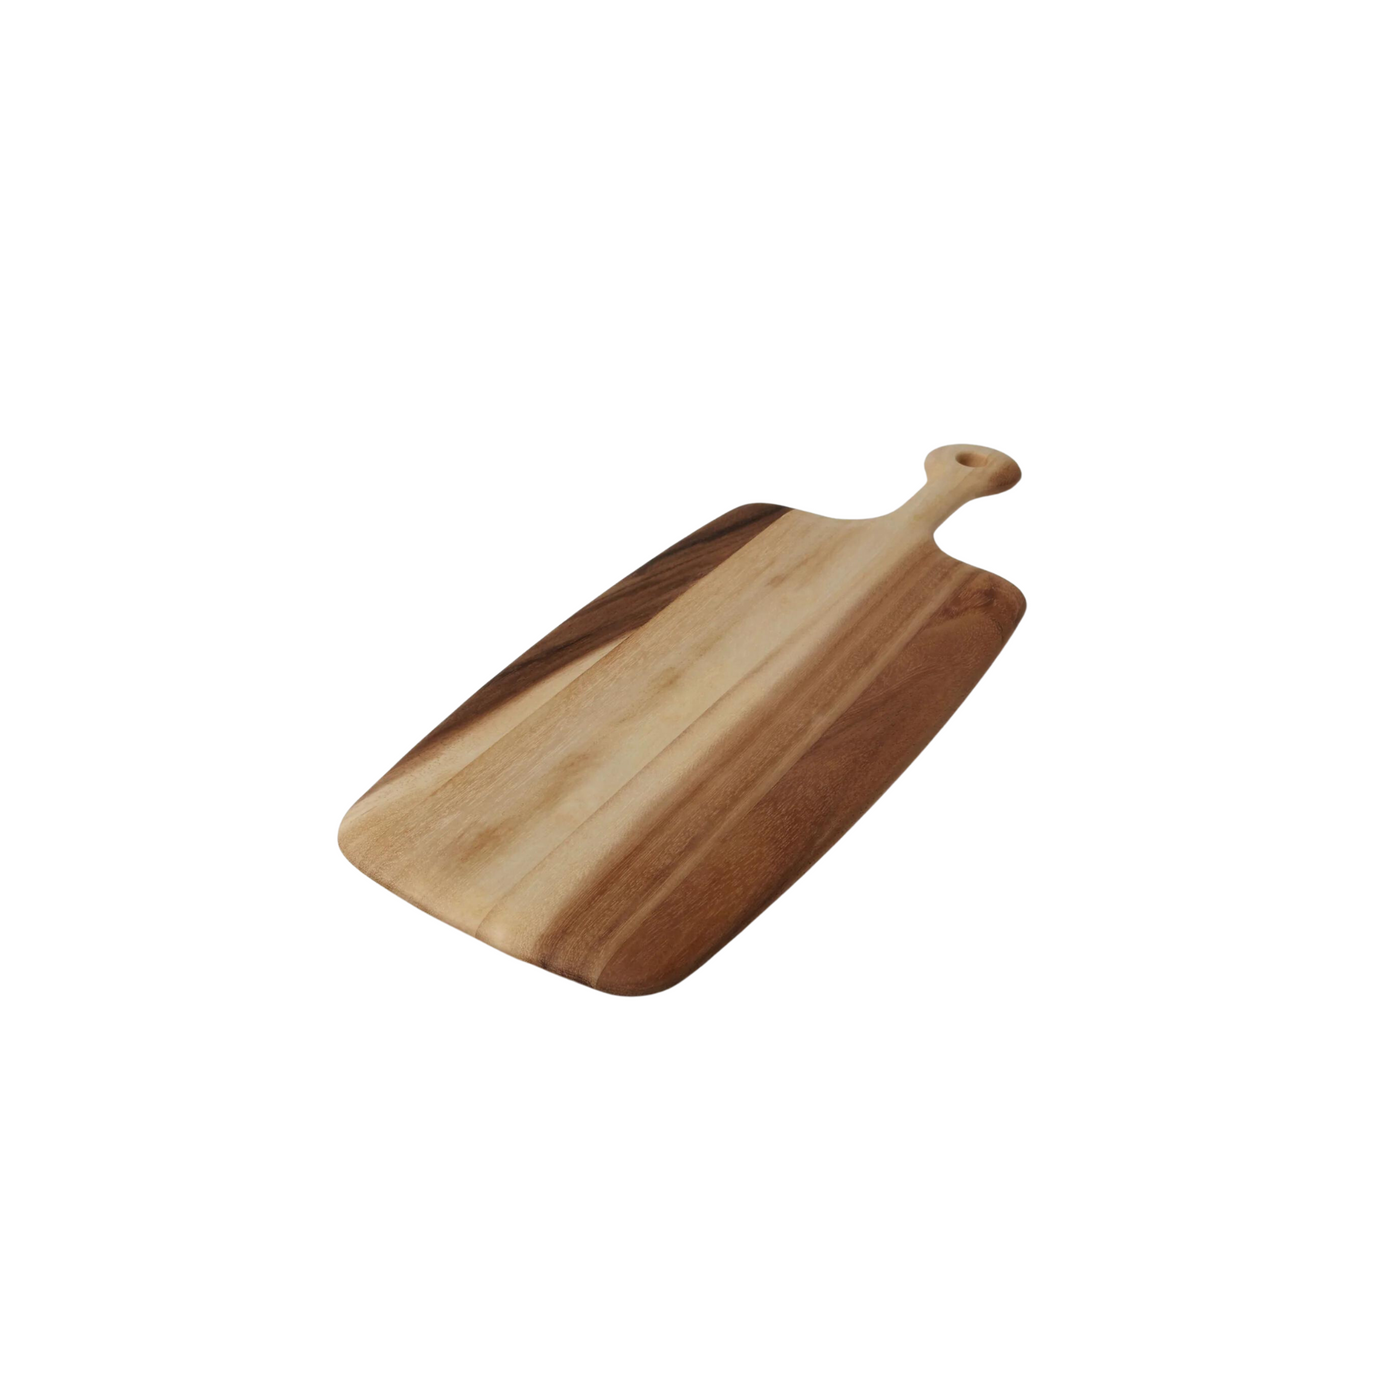 Acacia Rectangular Board with Short Handle, by Be Home